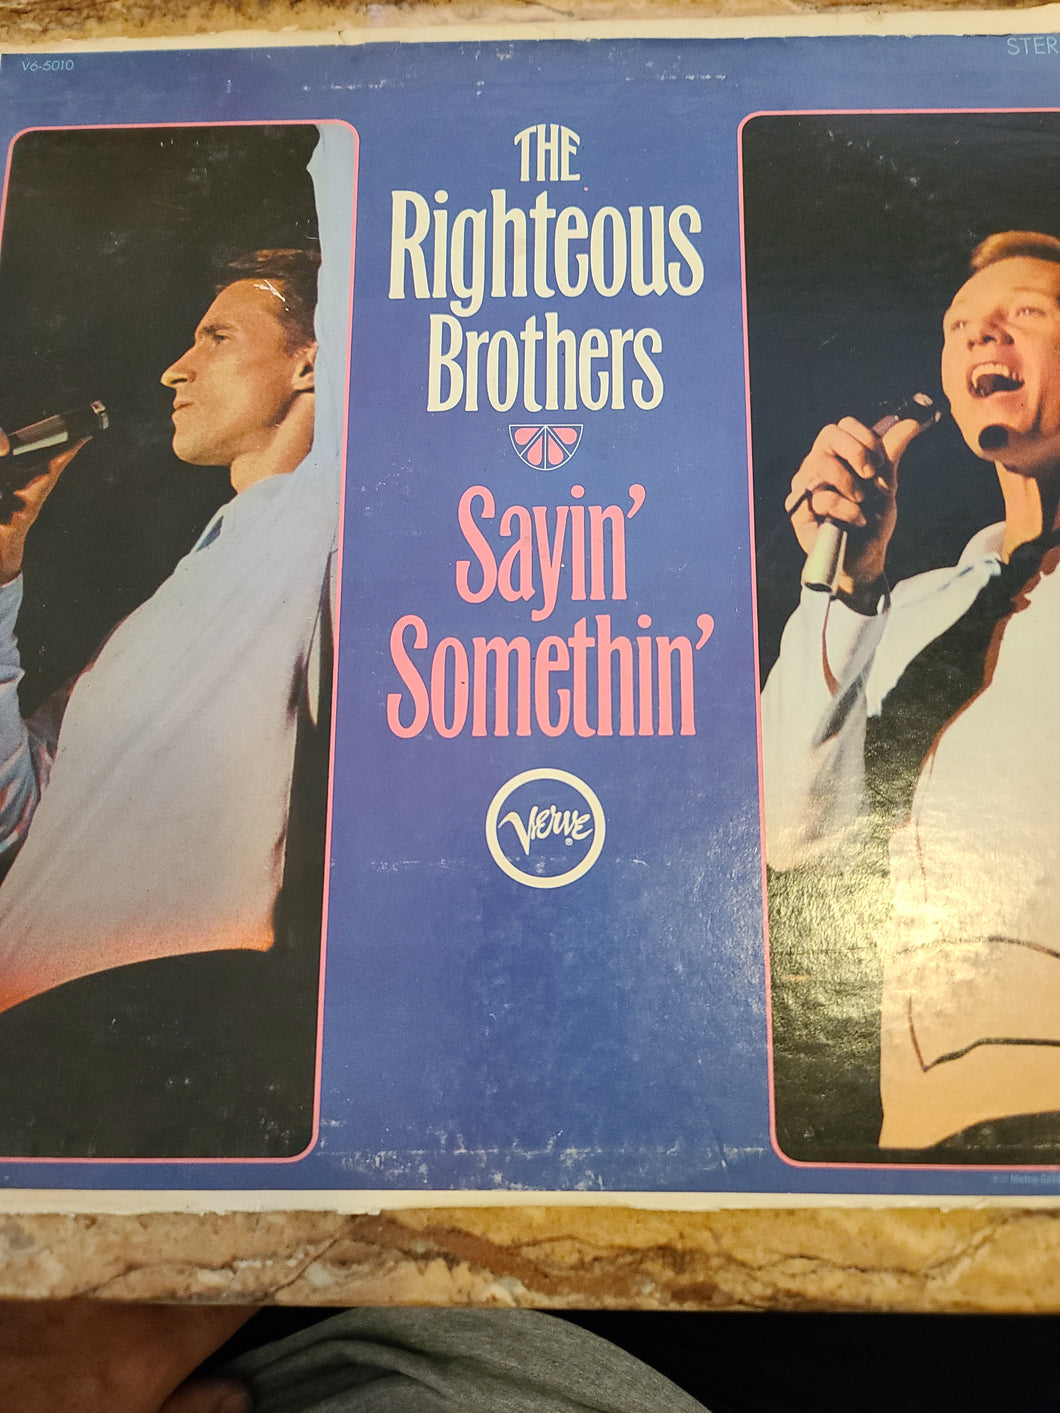 The Righteous Brothers, Sayin' Somethin'